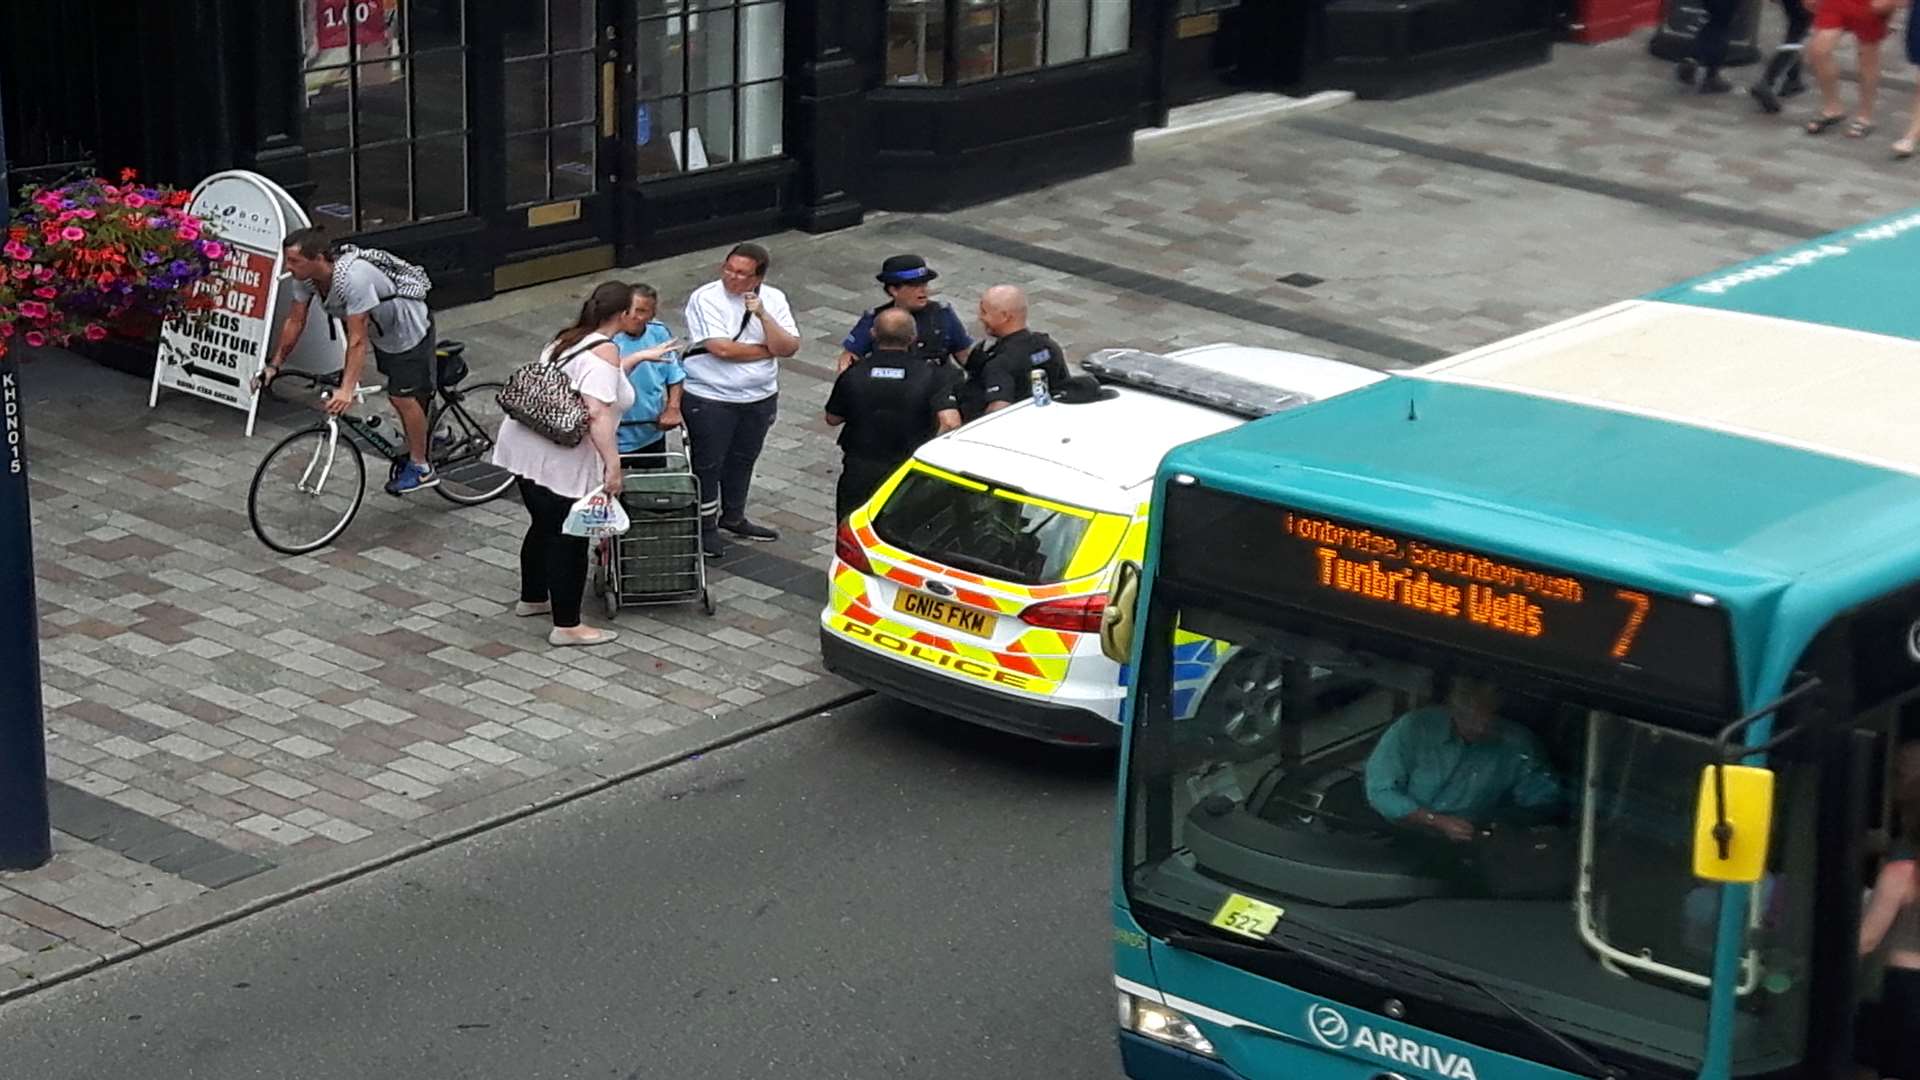 Police were called to Maidstone High Street